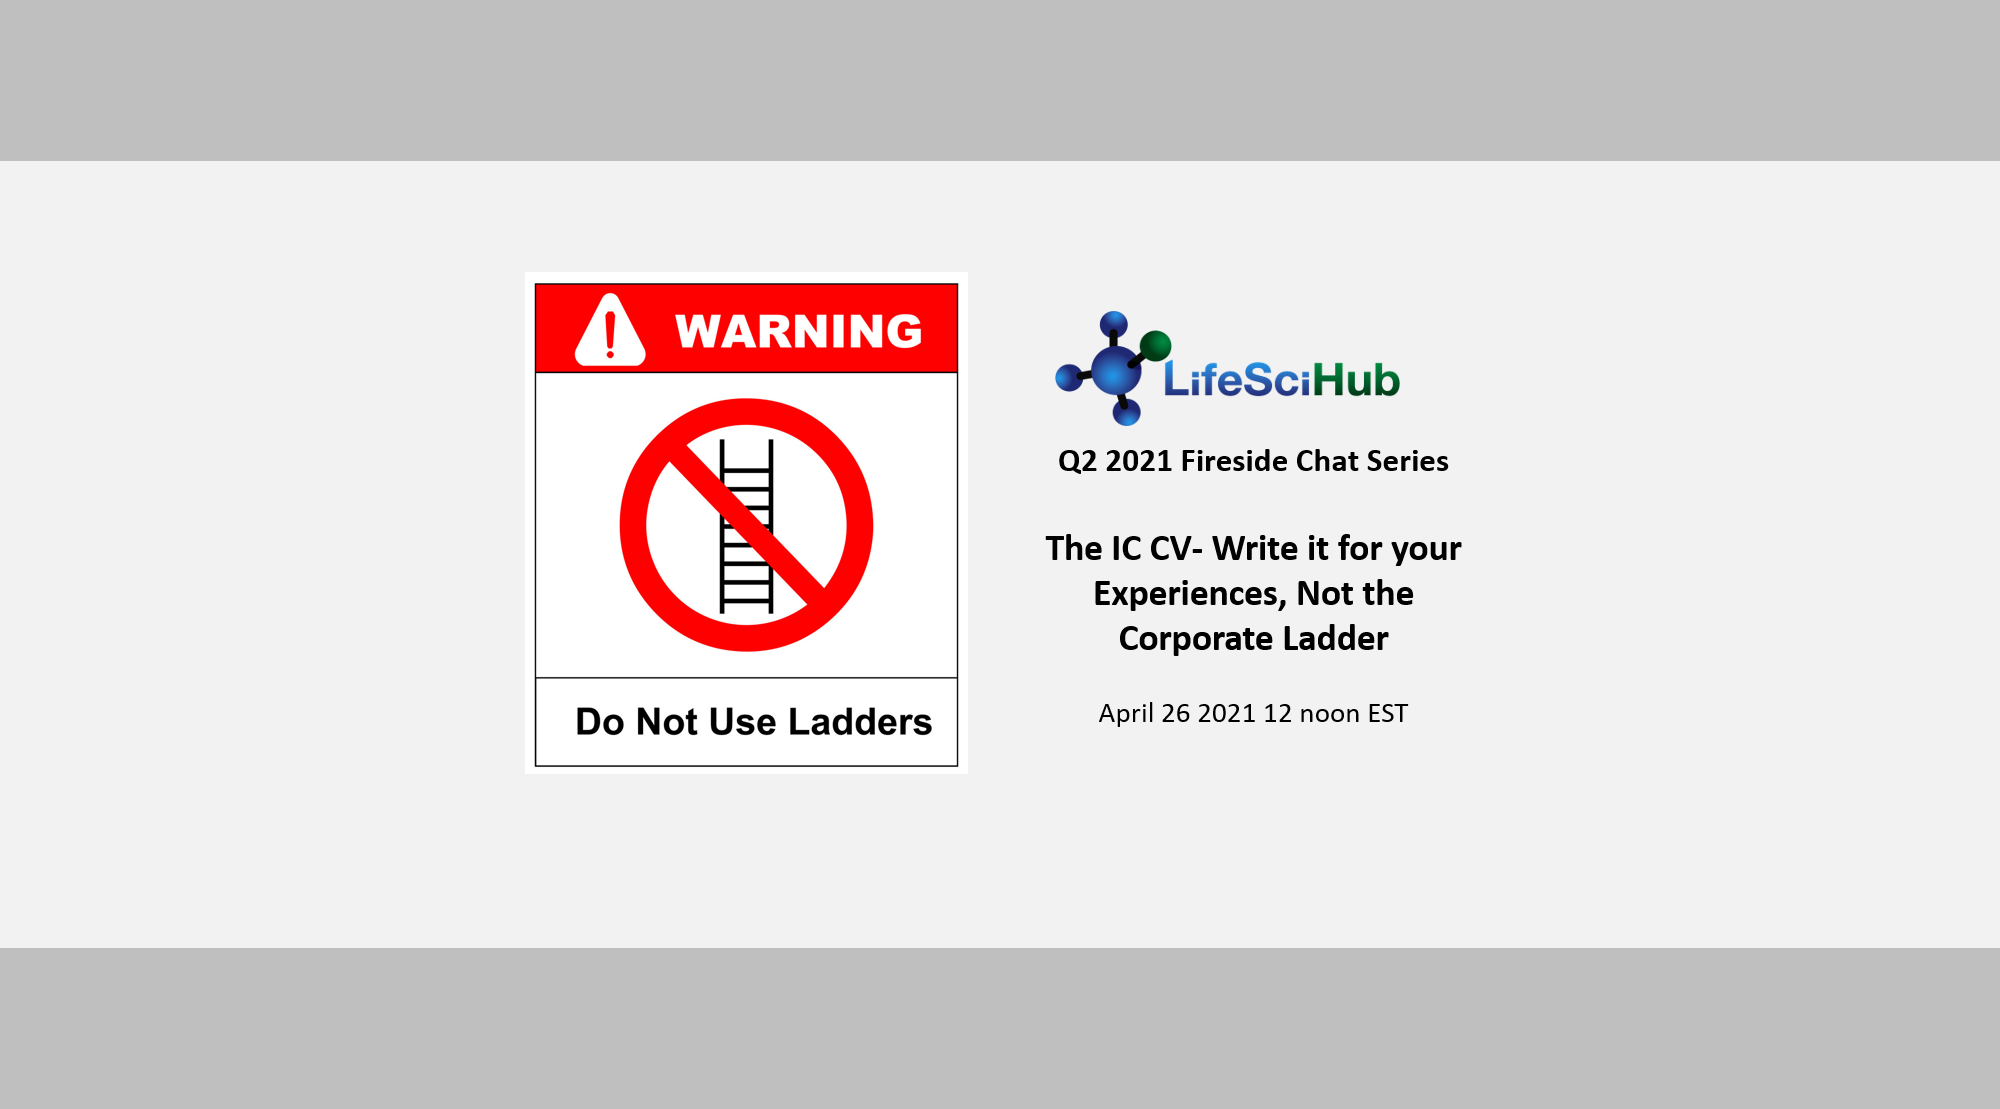 LifeSciHub Fireside: The IC CV- Write it for your Experiences, Not the Corporate Ladder